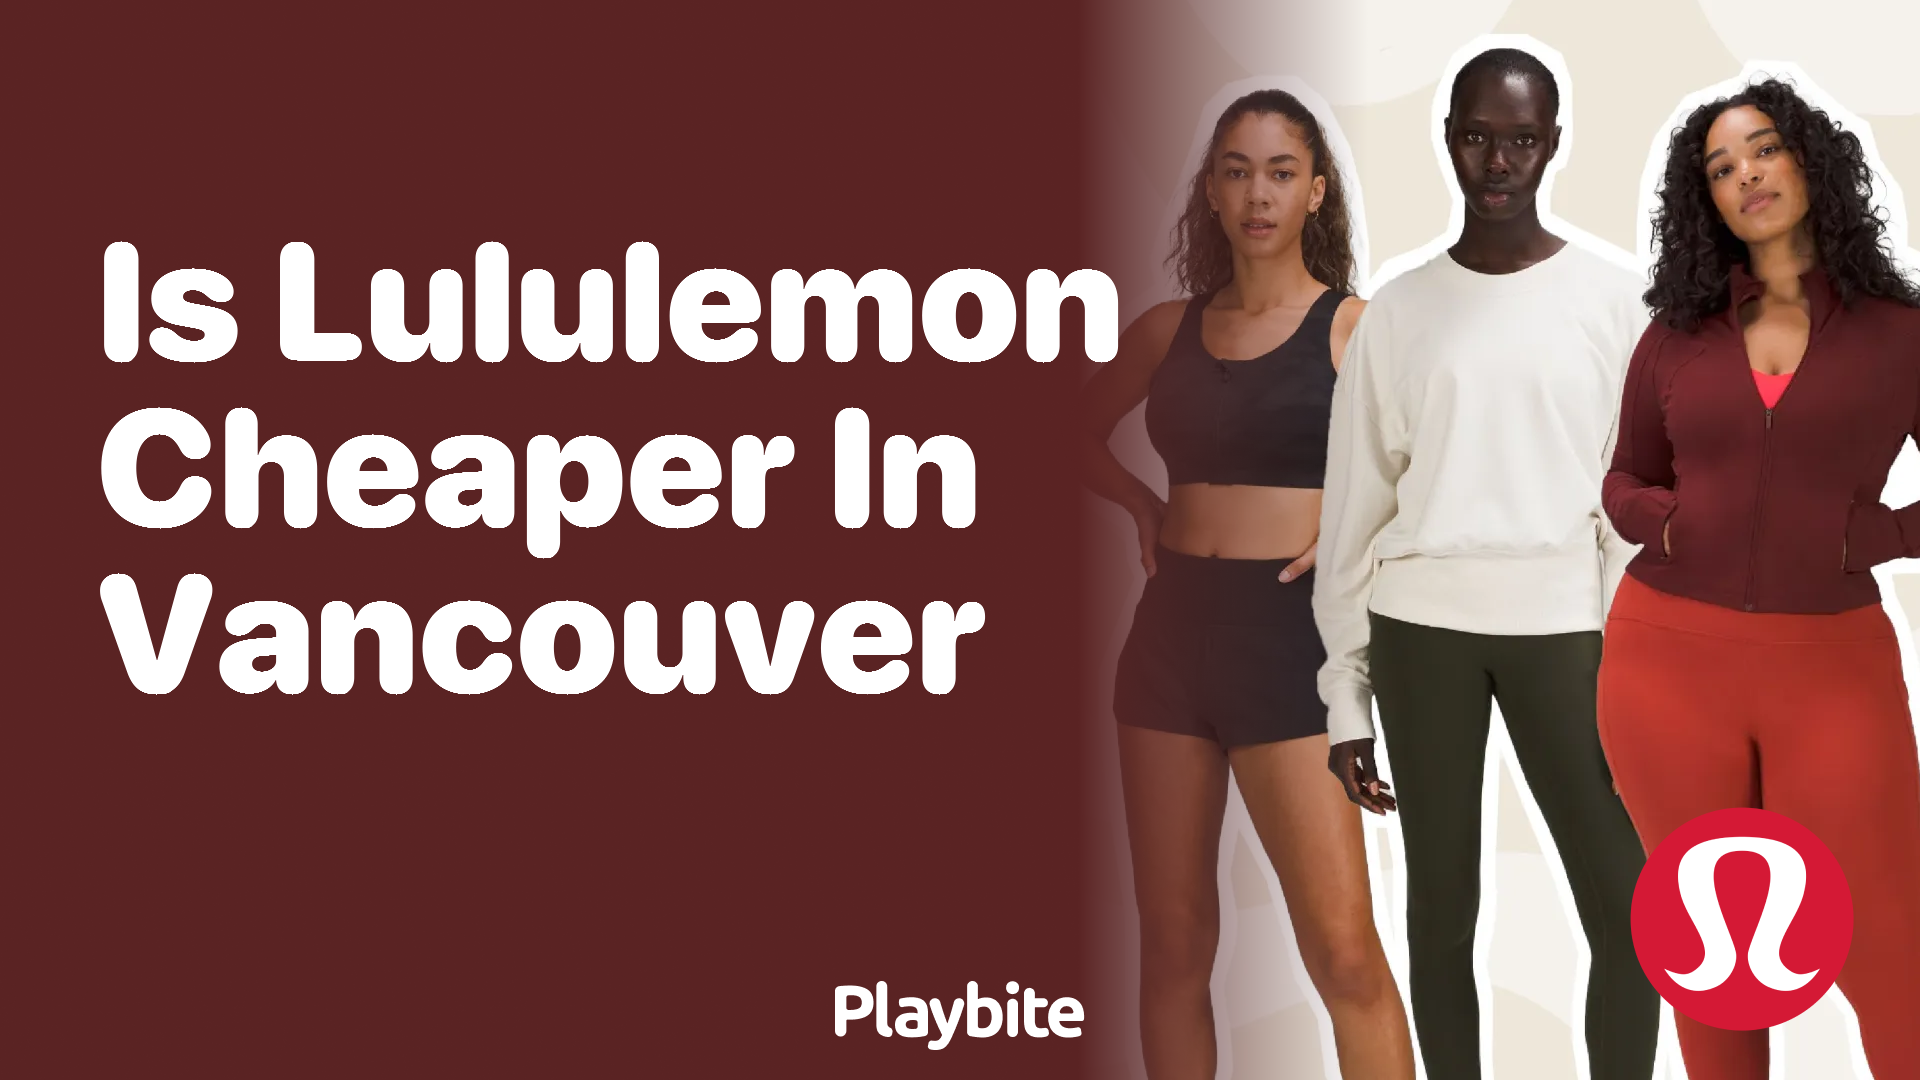 Lululemon Seeks To Bring Out The Divine In Vancouver's Creative